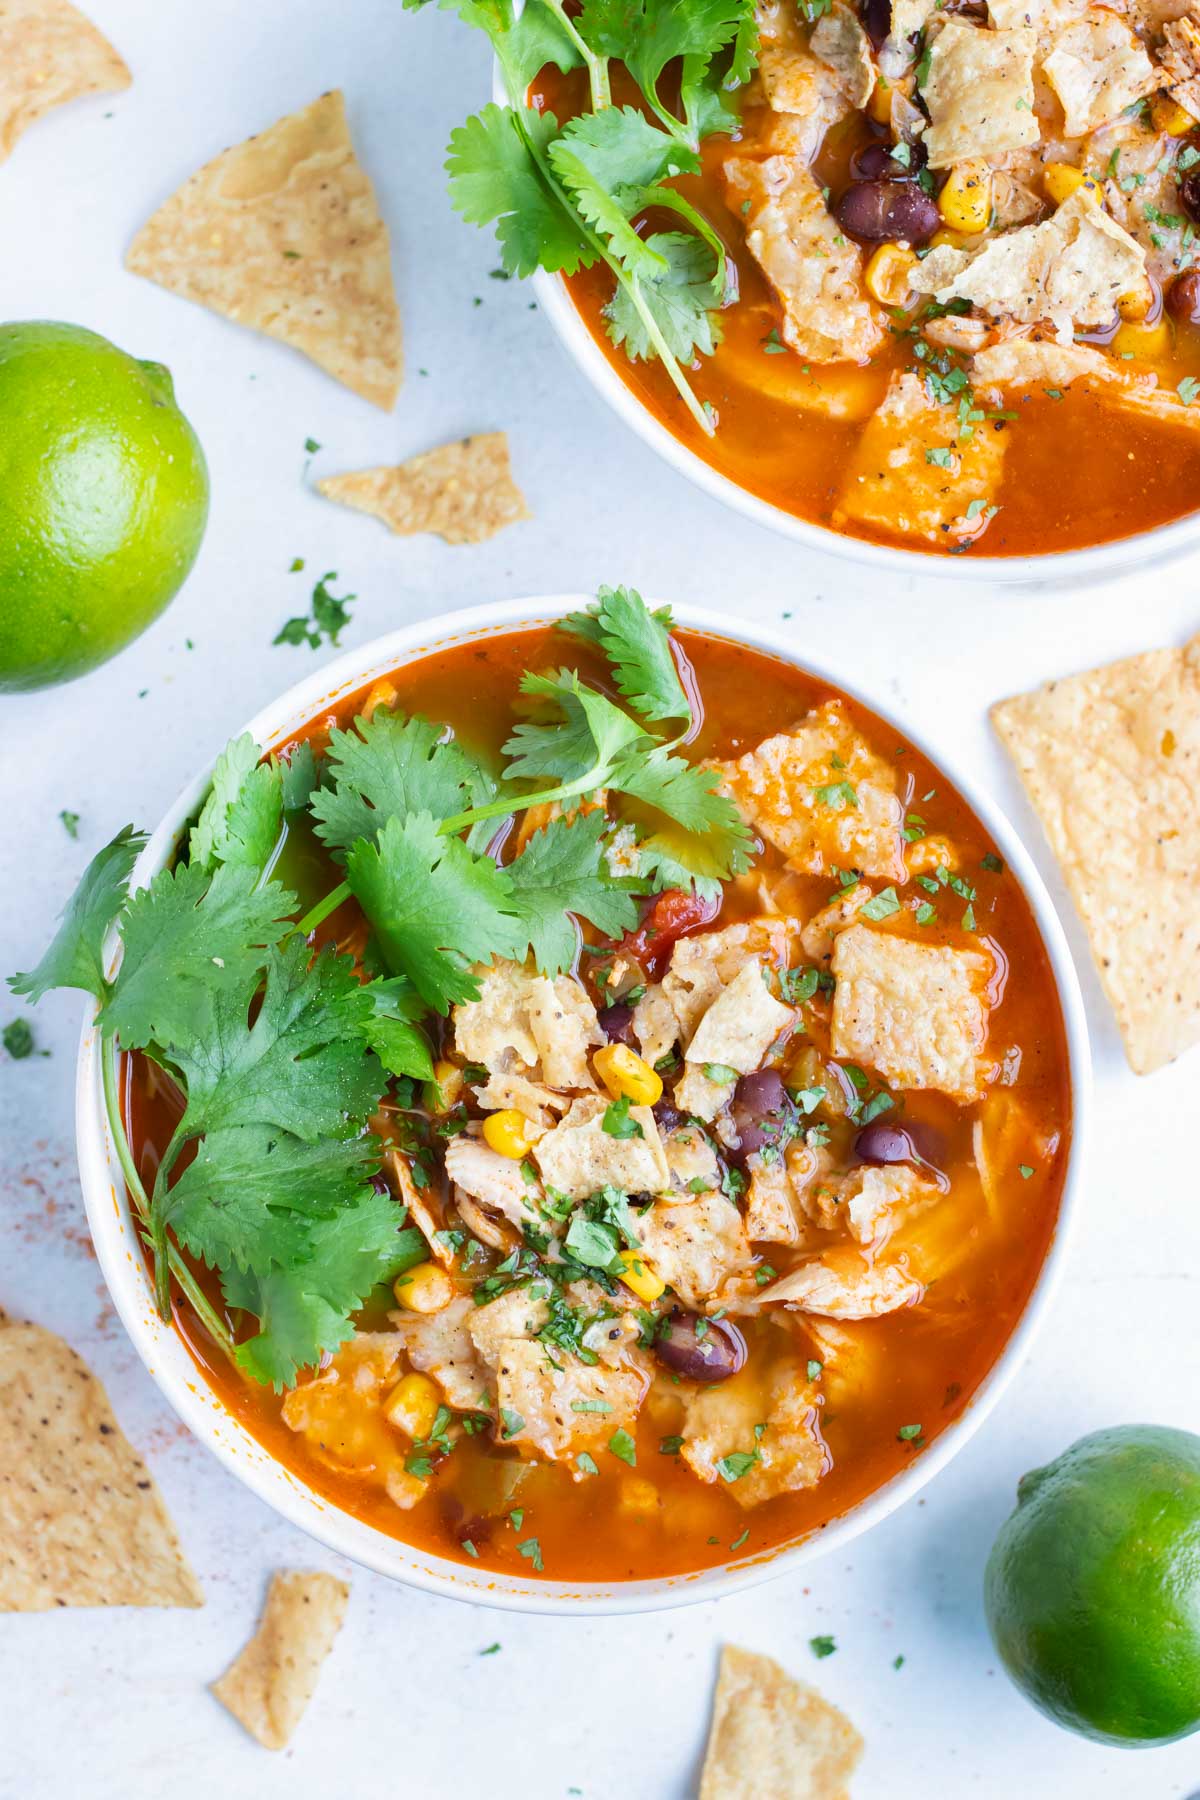 Chicken tortilla soup is topped with cilantro and served in a bowl.